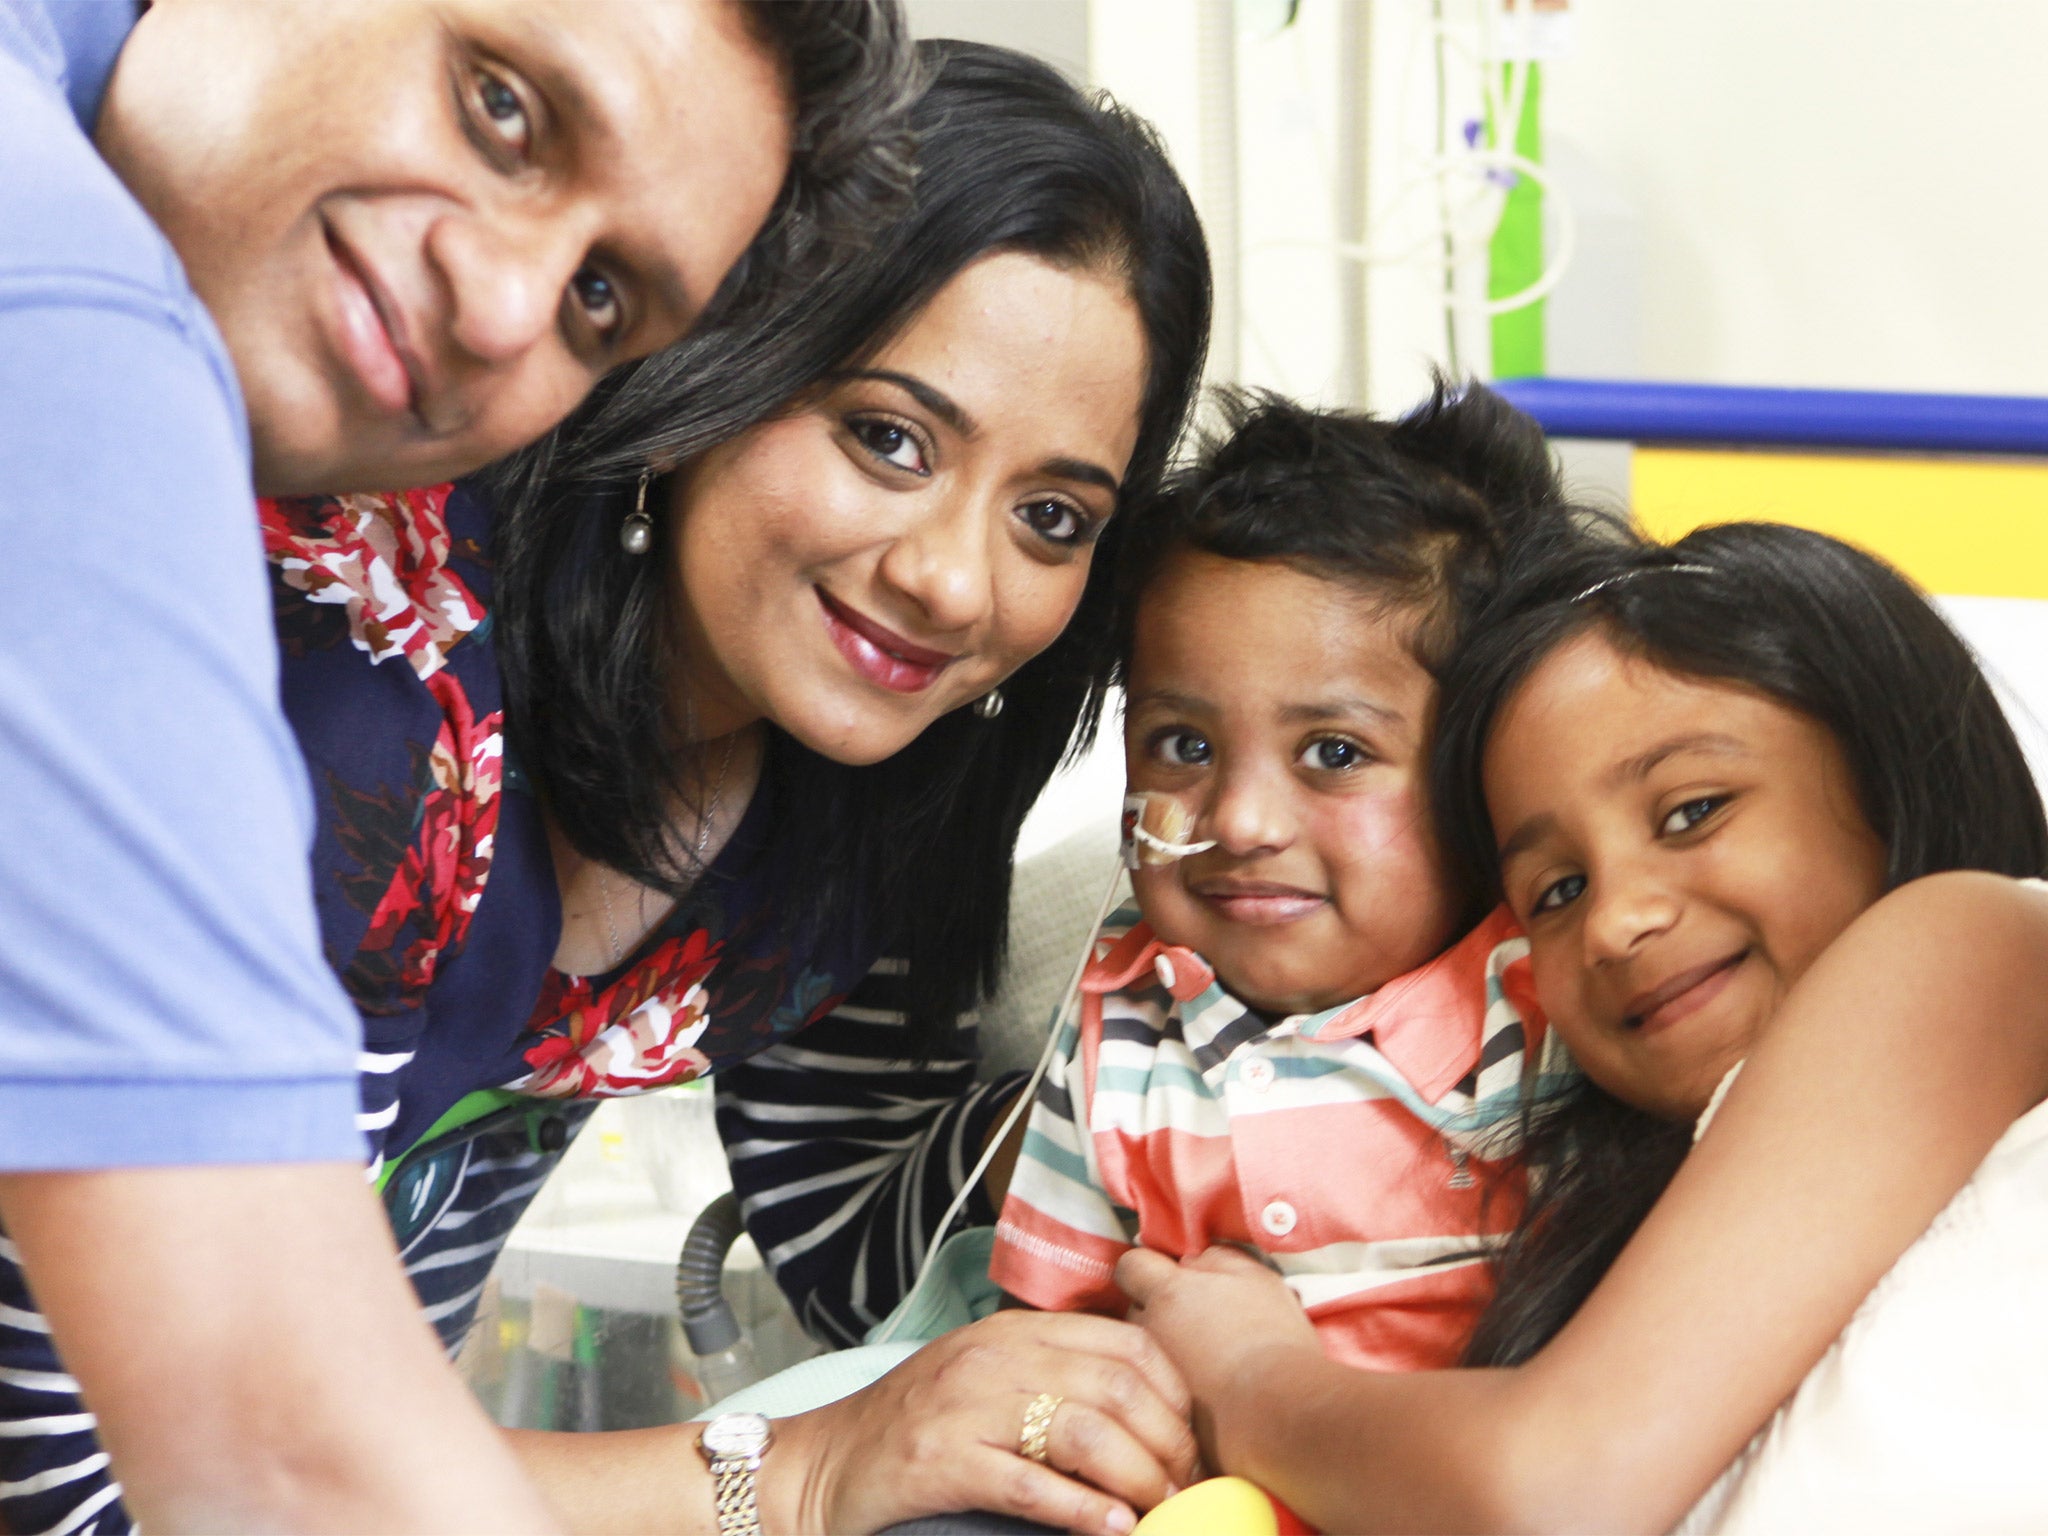 Anand Krishna, his wife Sujatha Anand, their son, Rehaan, and daughter, Rhea, were helped by the Louis Dundas Centre for Children’s Palliative Care